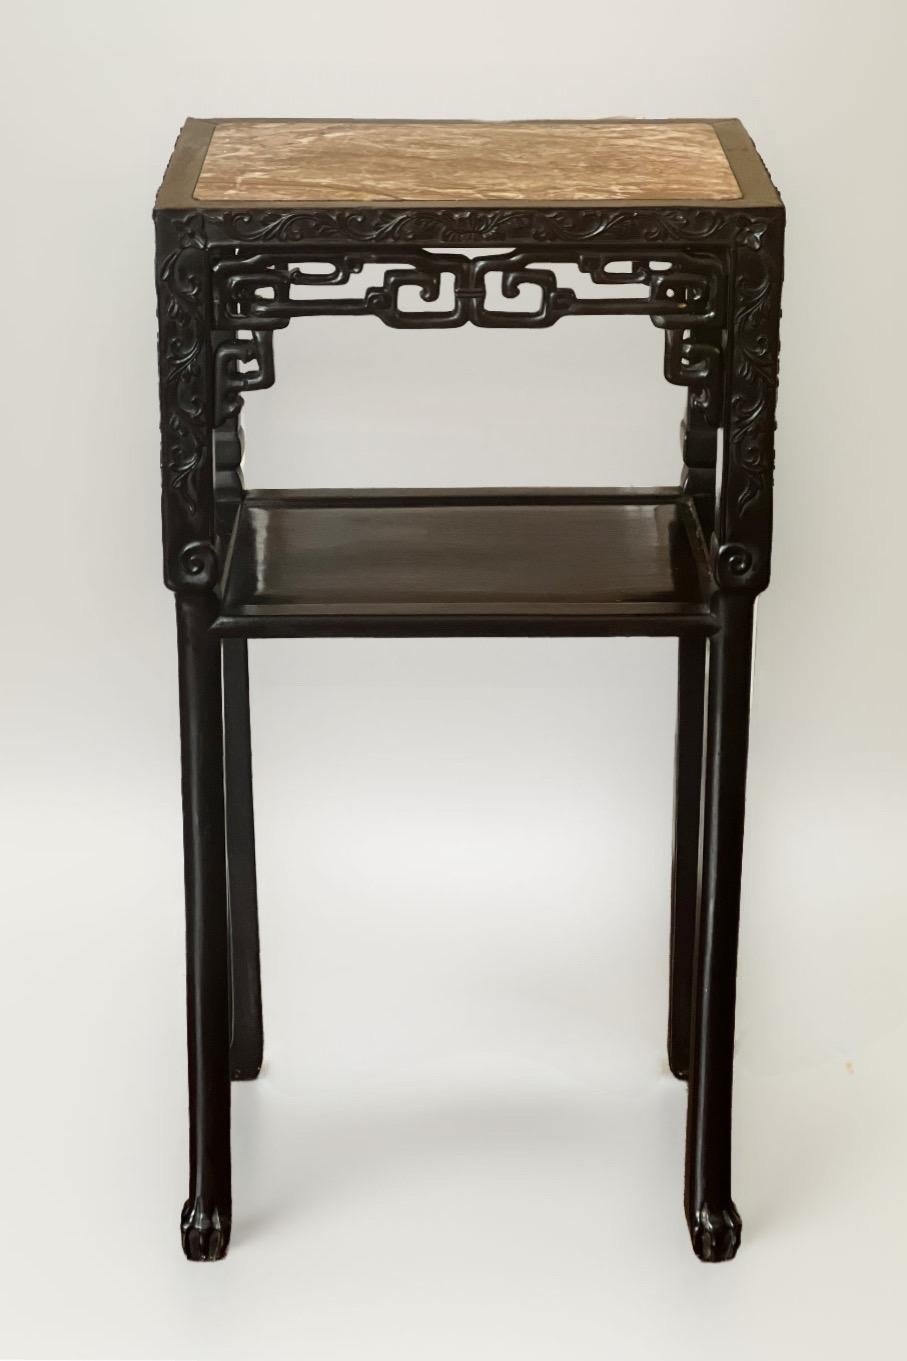 19th century Qing dynasty carved hardwood pedestal table or plant stand with inset rouge marble top.

Rectangular black lacquered pedestal table with a carved and pierced frieze with a relief scrolling foliate design framing the reticulated